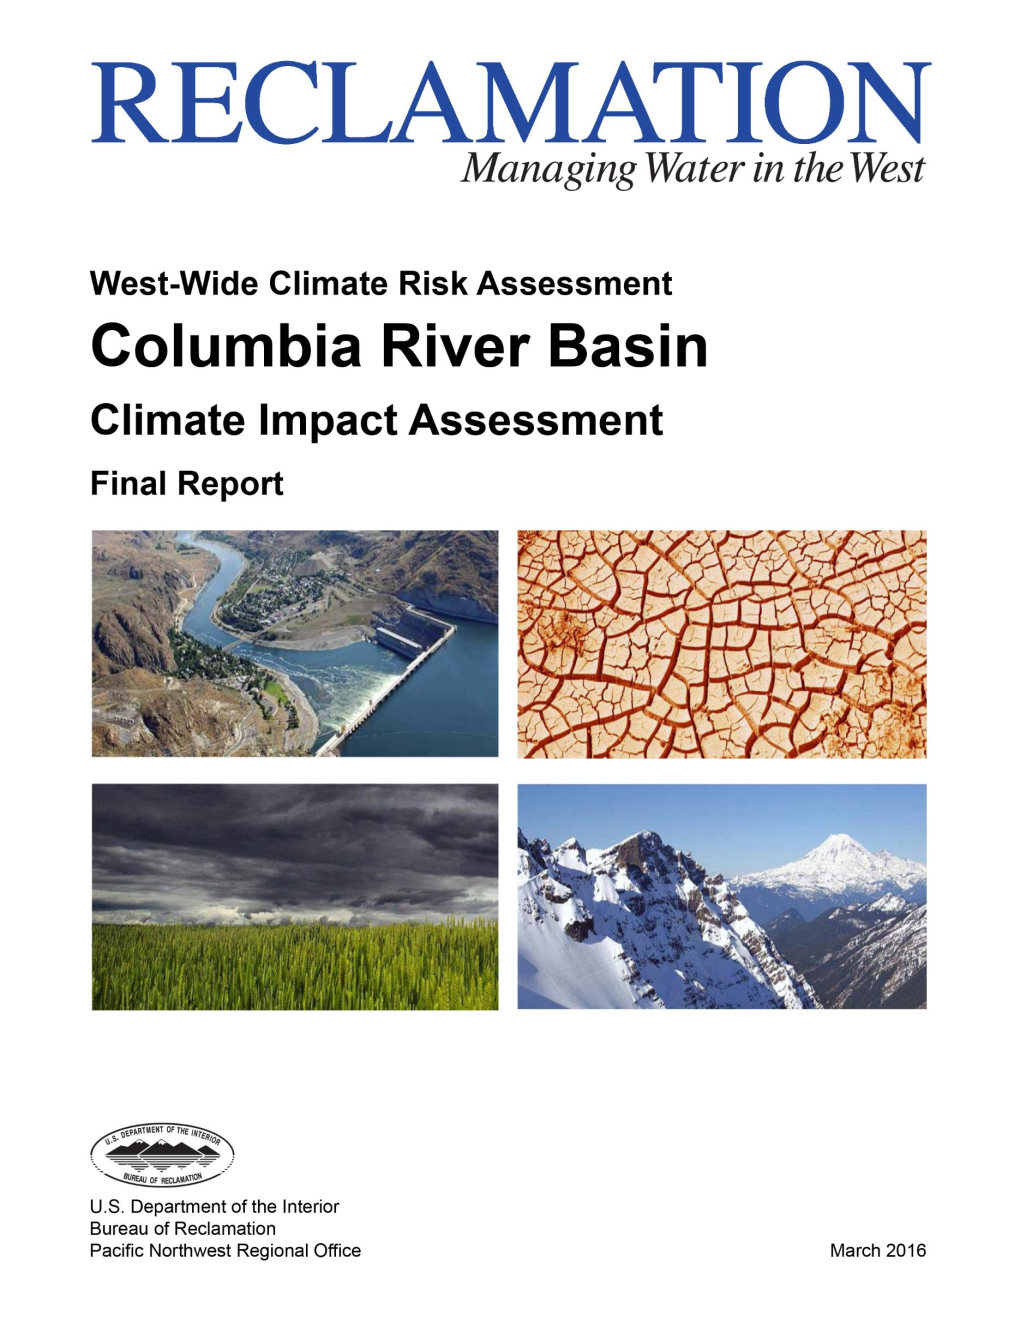 Columbia River Basin Climate Impact Assessment Final Report